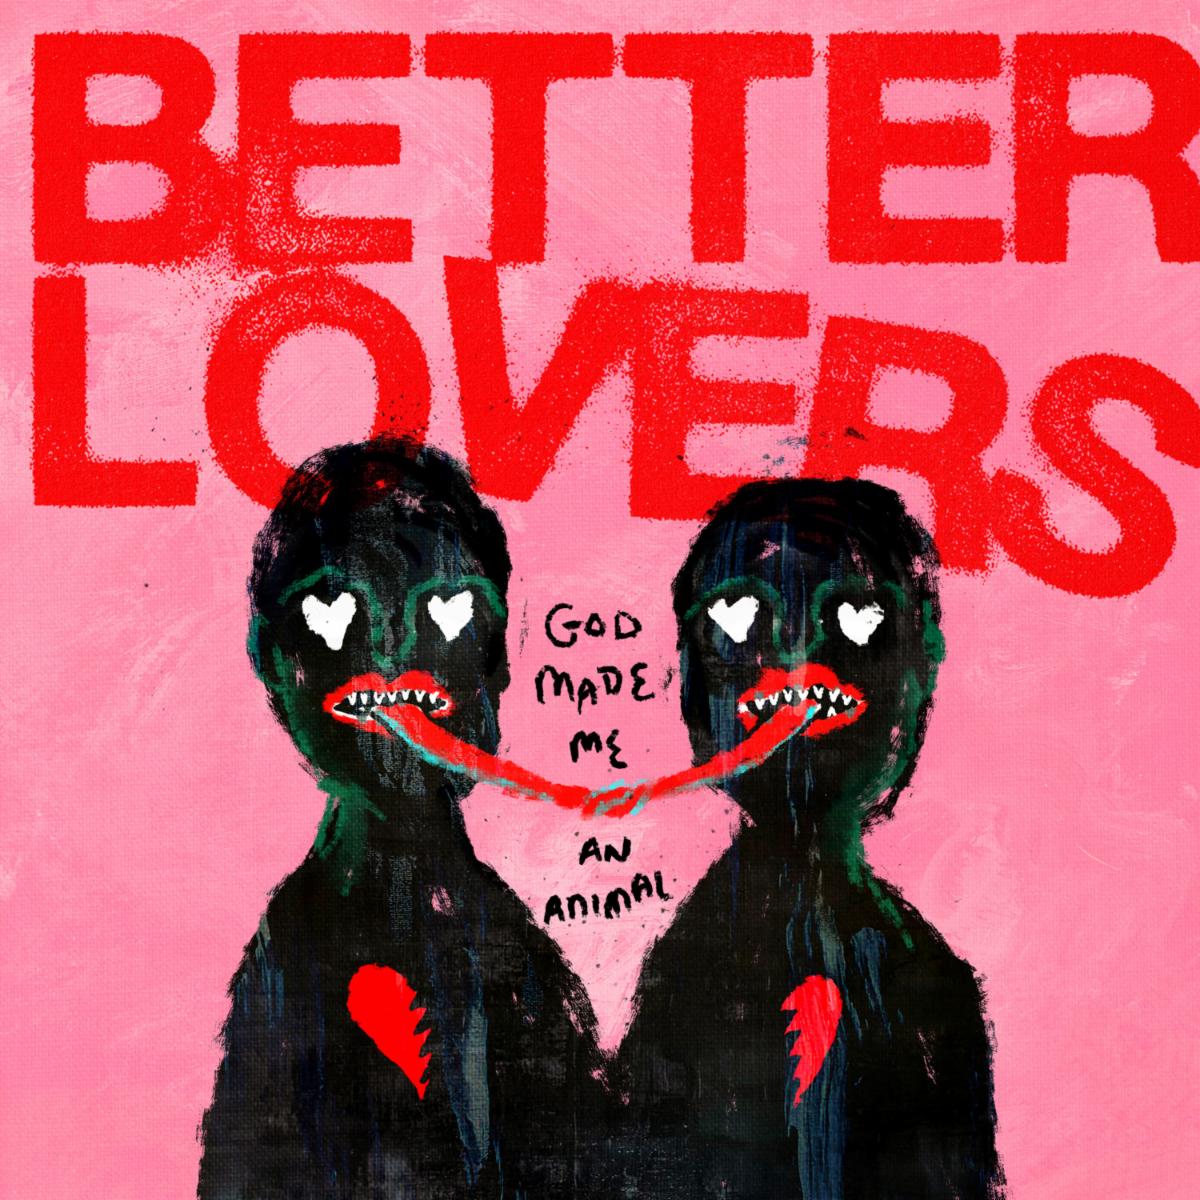 better lovers band tour